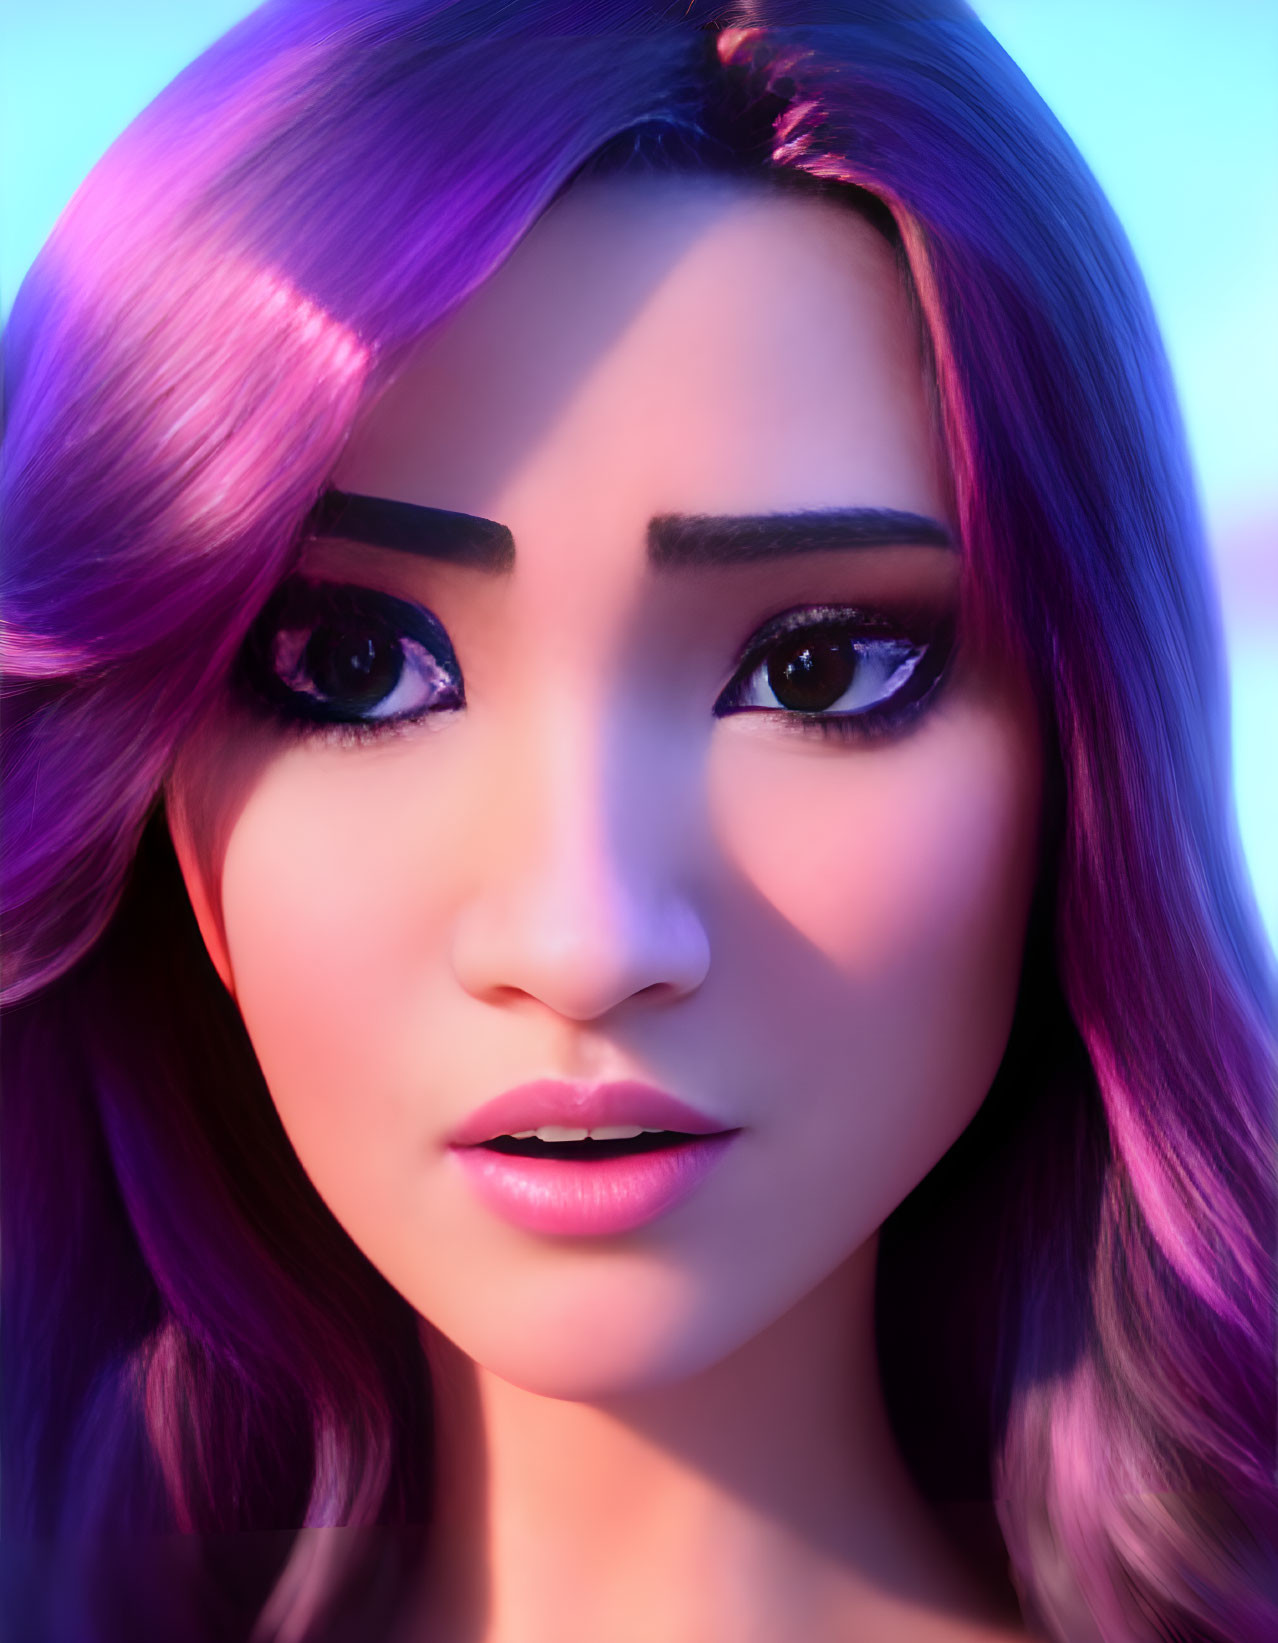 Female with Purple Hair and Dark Eyes in Detailed Makeup in Purple-lit Setting